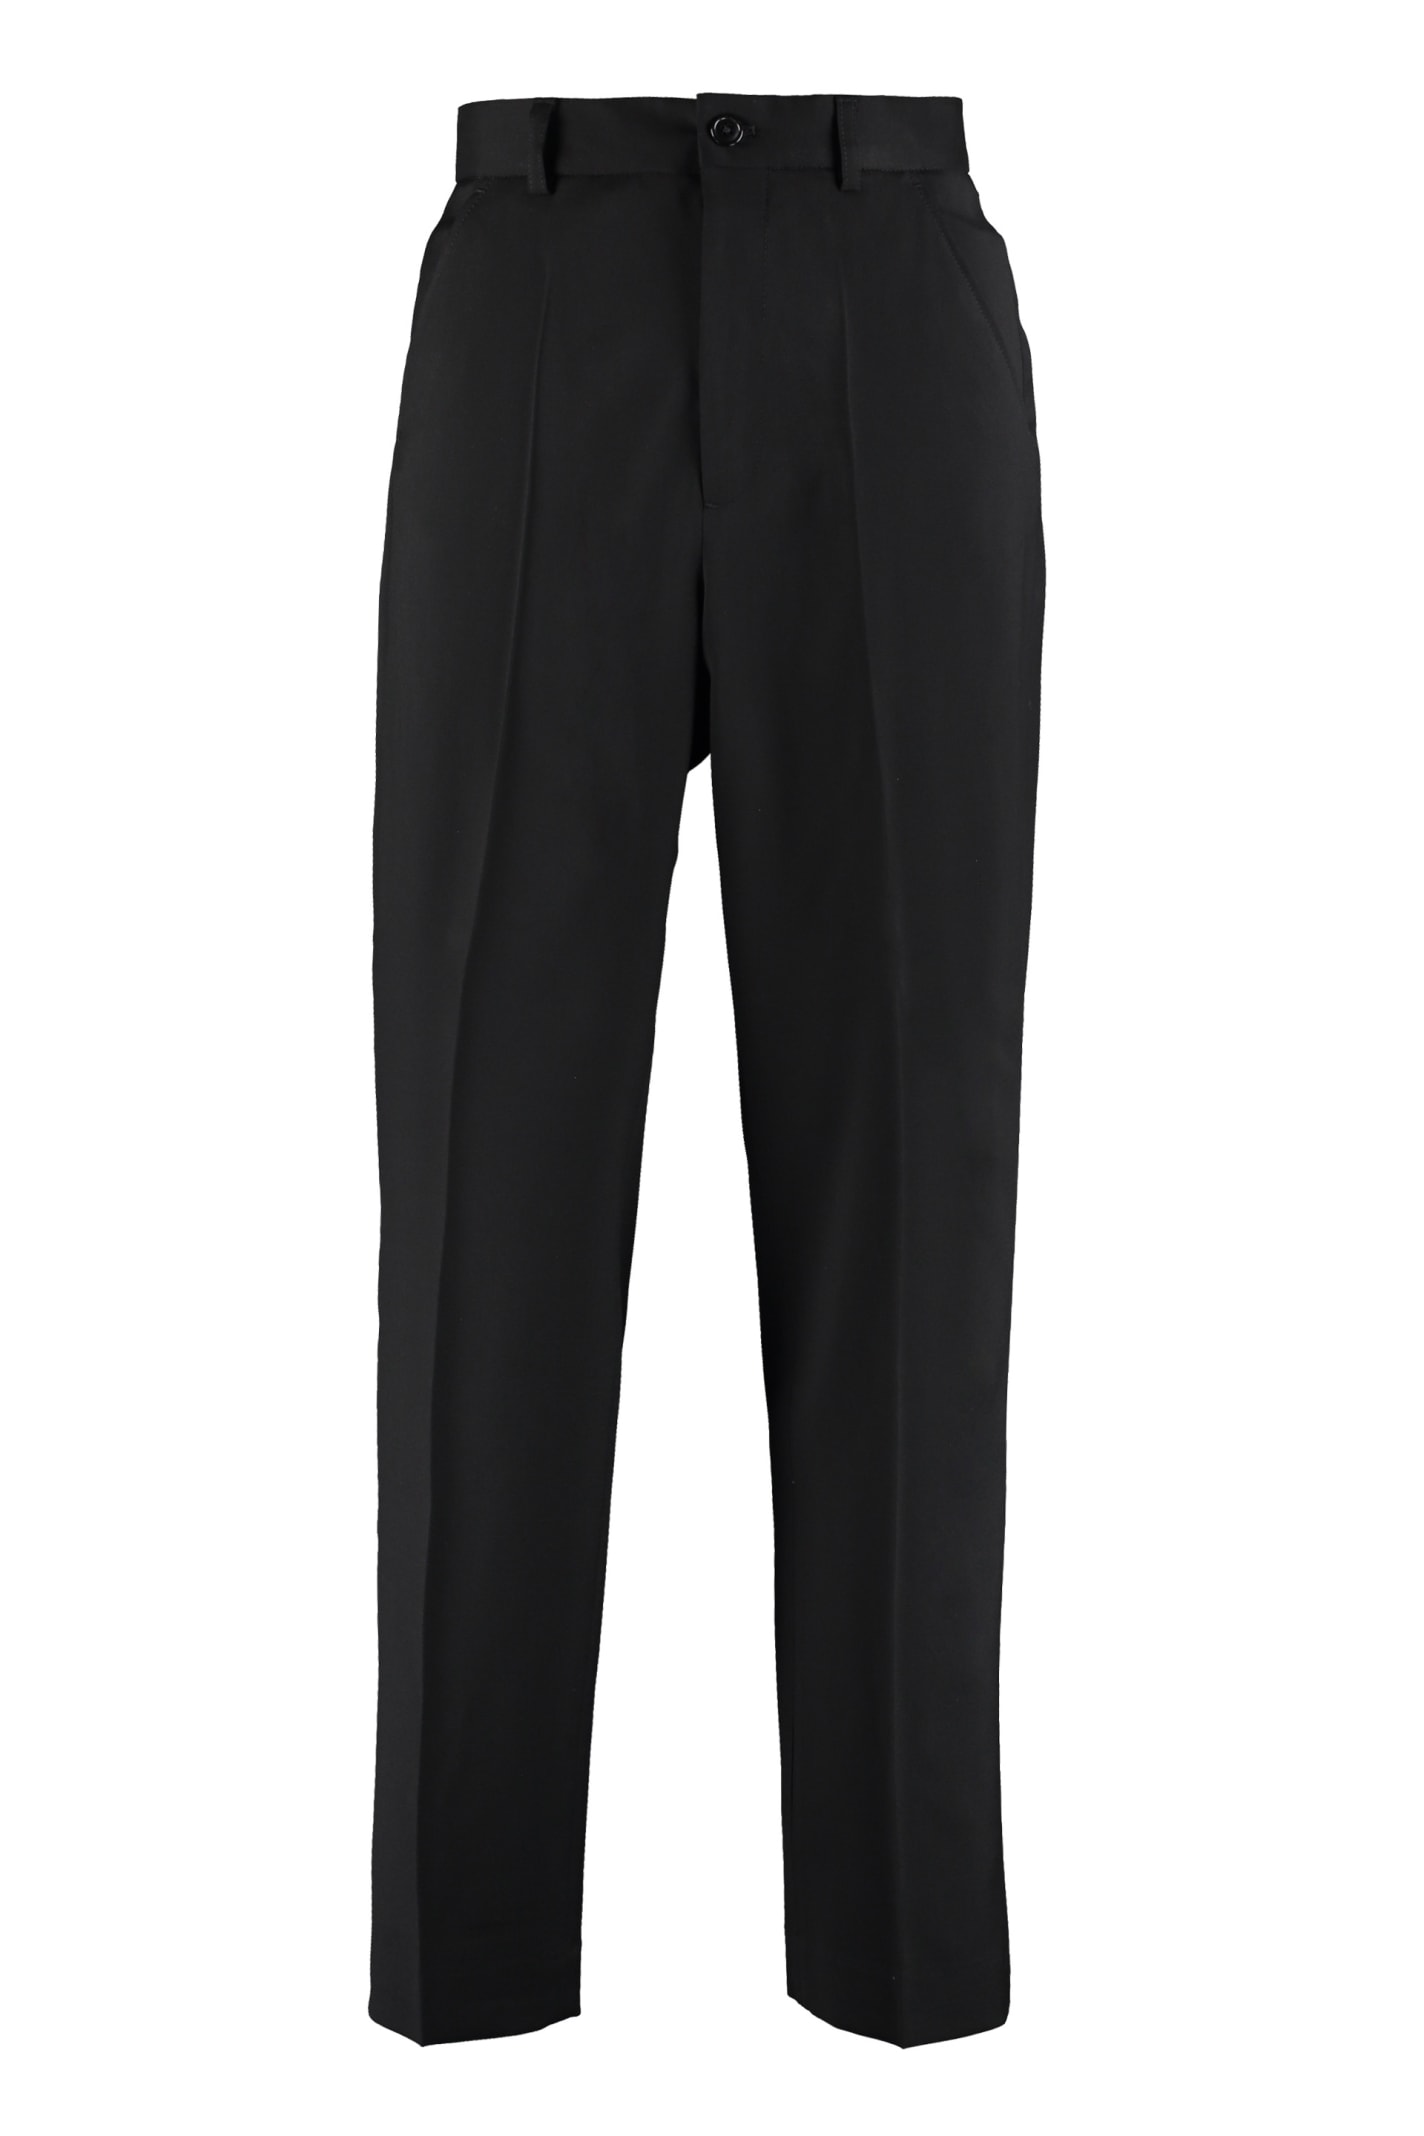 Our Legacy Chino 22 Virgin Wool Trousers